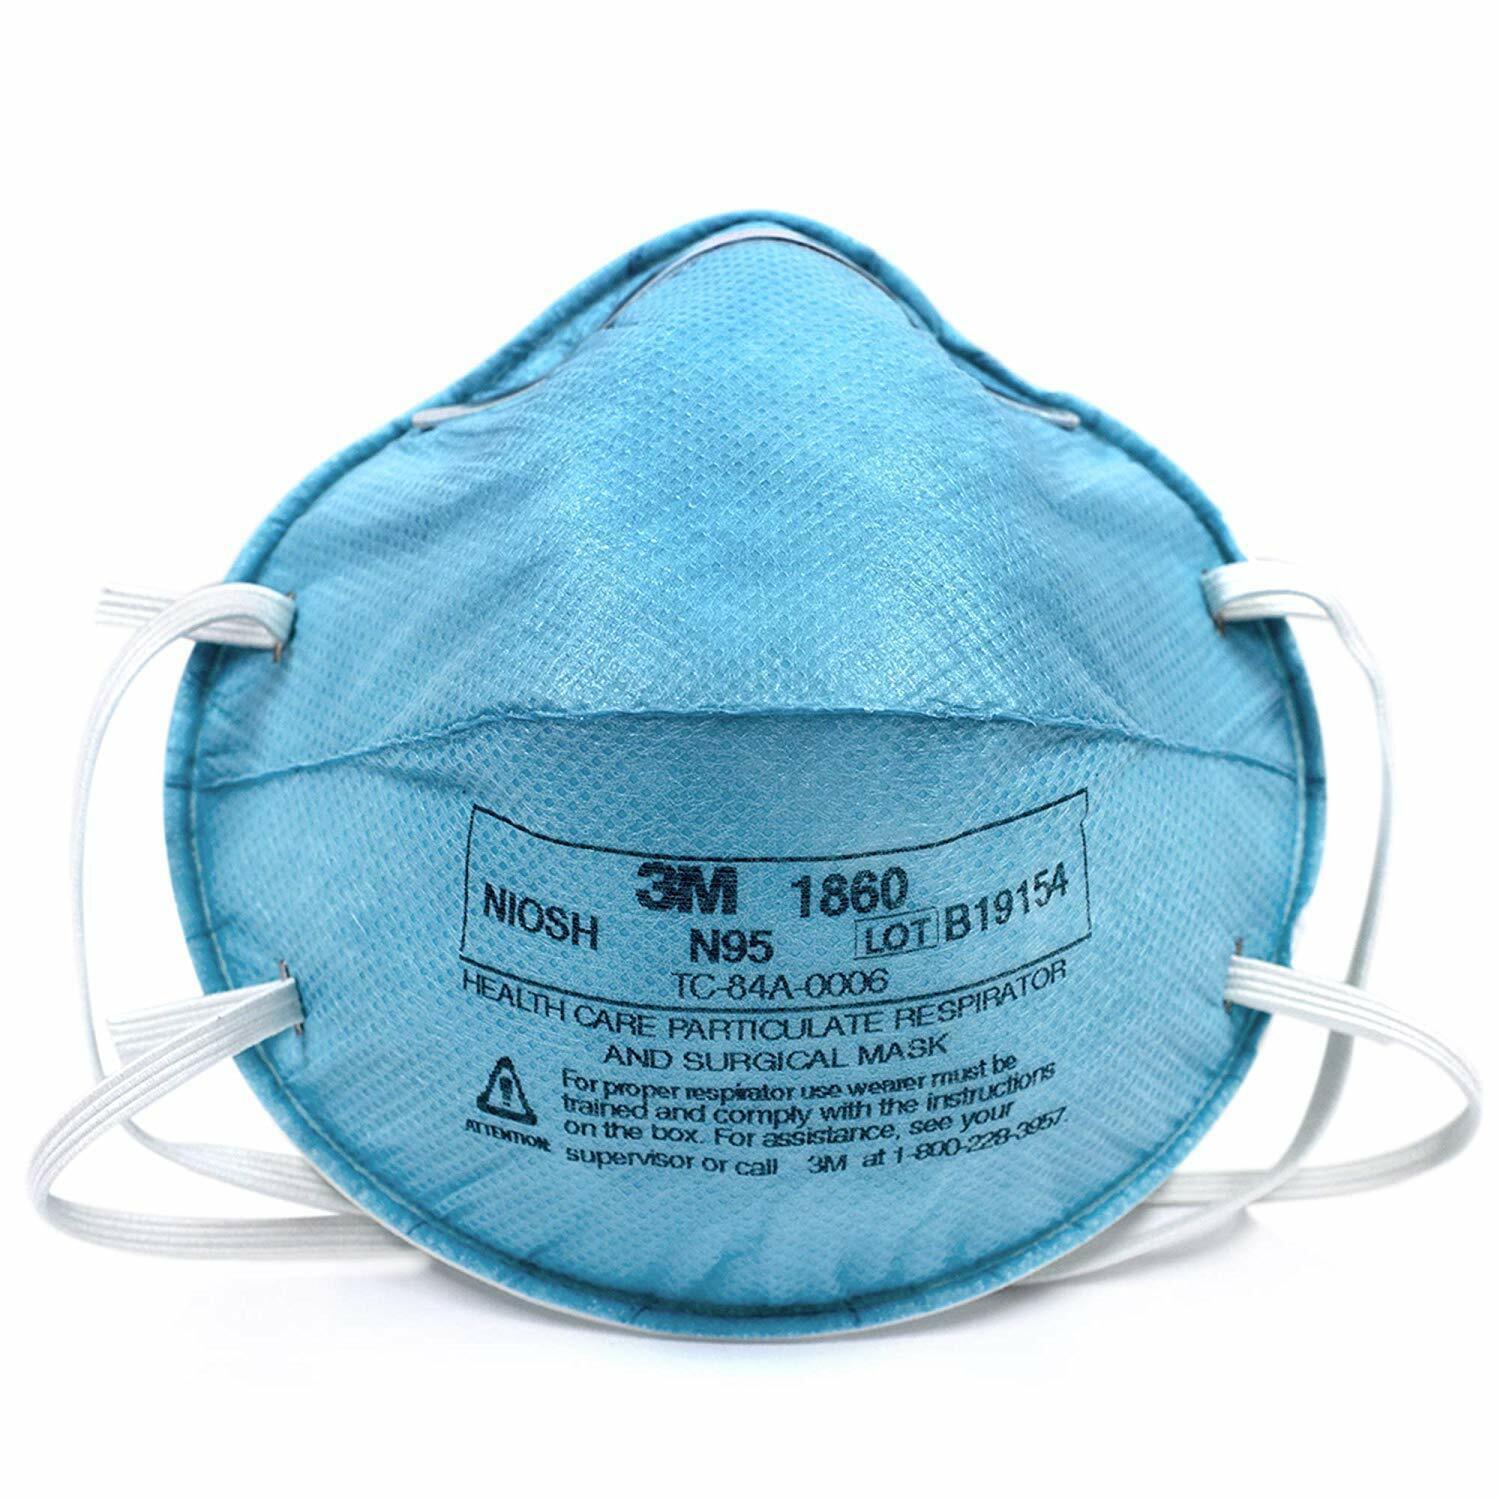 *20-Pieces* 3M N95 Health Care Particulate Respirator Surgical Face Mask 1860 3M 3M 1860 - фотография #3